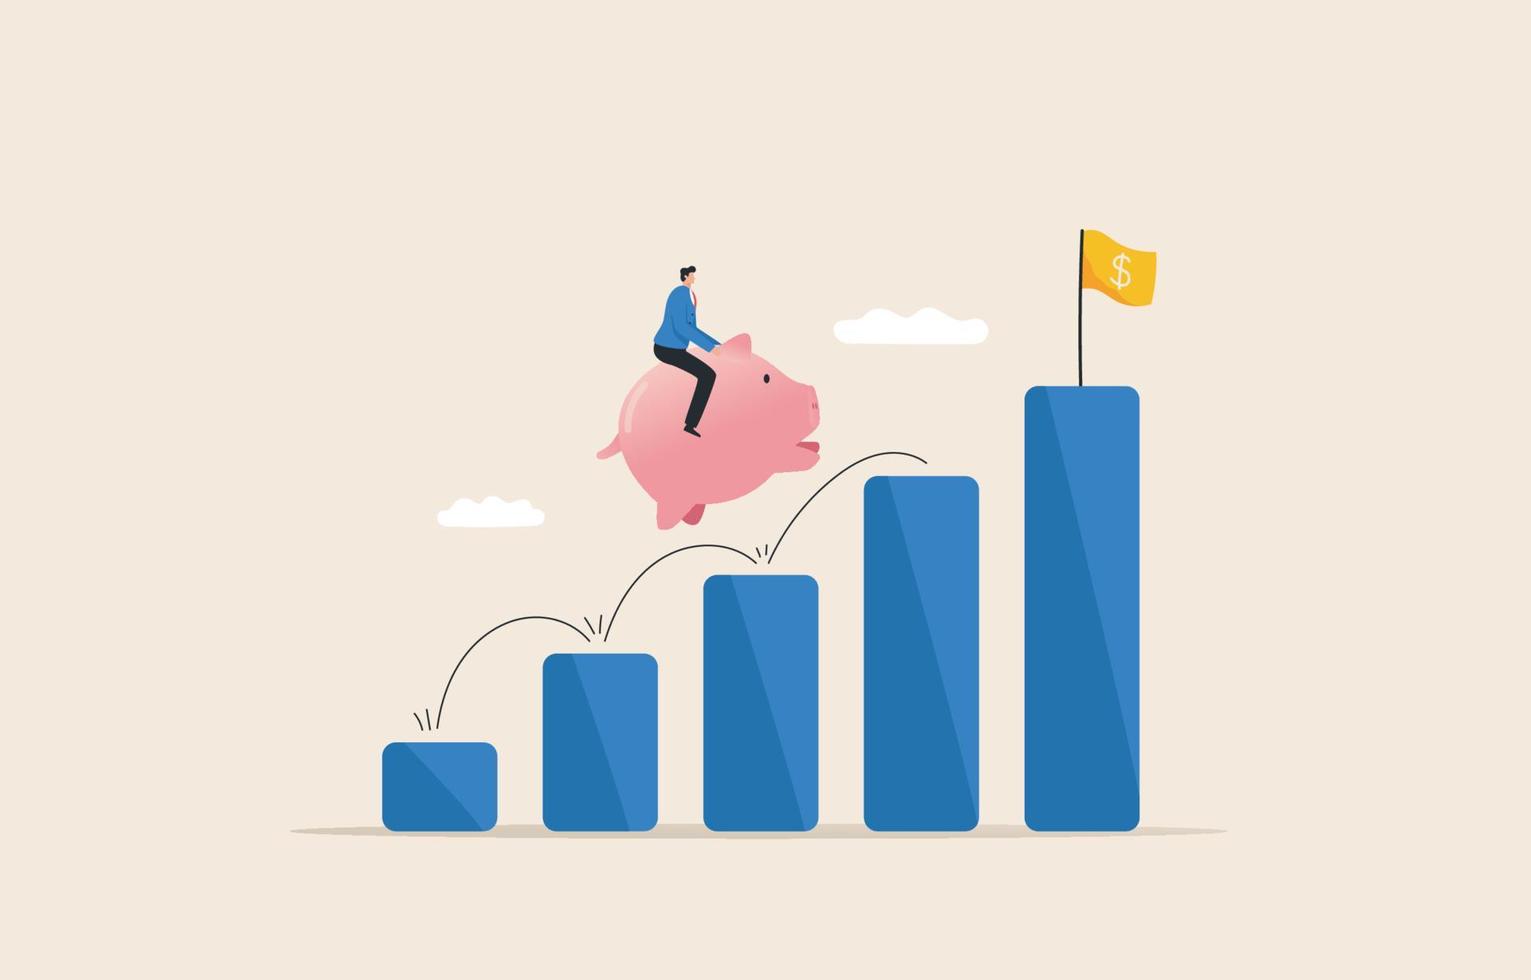 investment goals and revenue growth.  Interest earned from savings. stock funds. A businessman riding a piggy bank runs up the top charts. vector